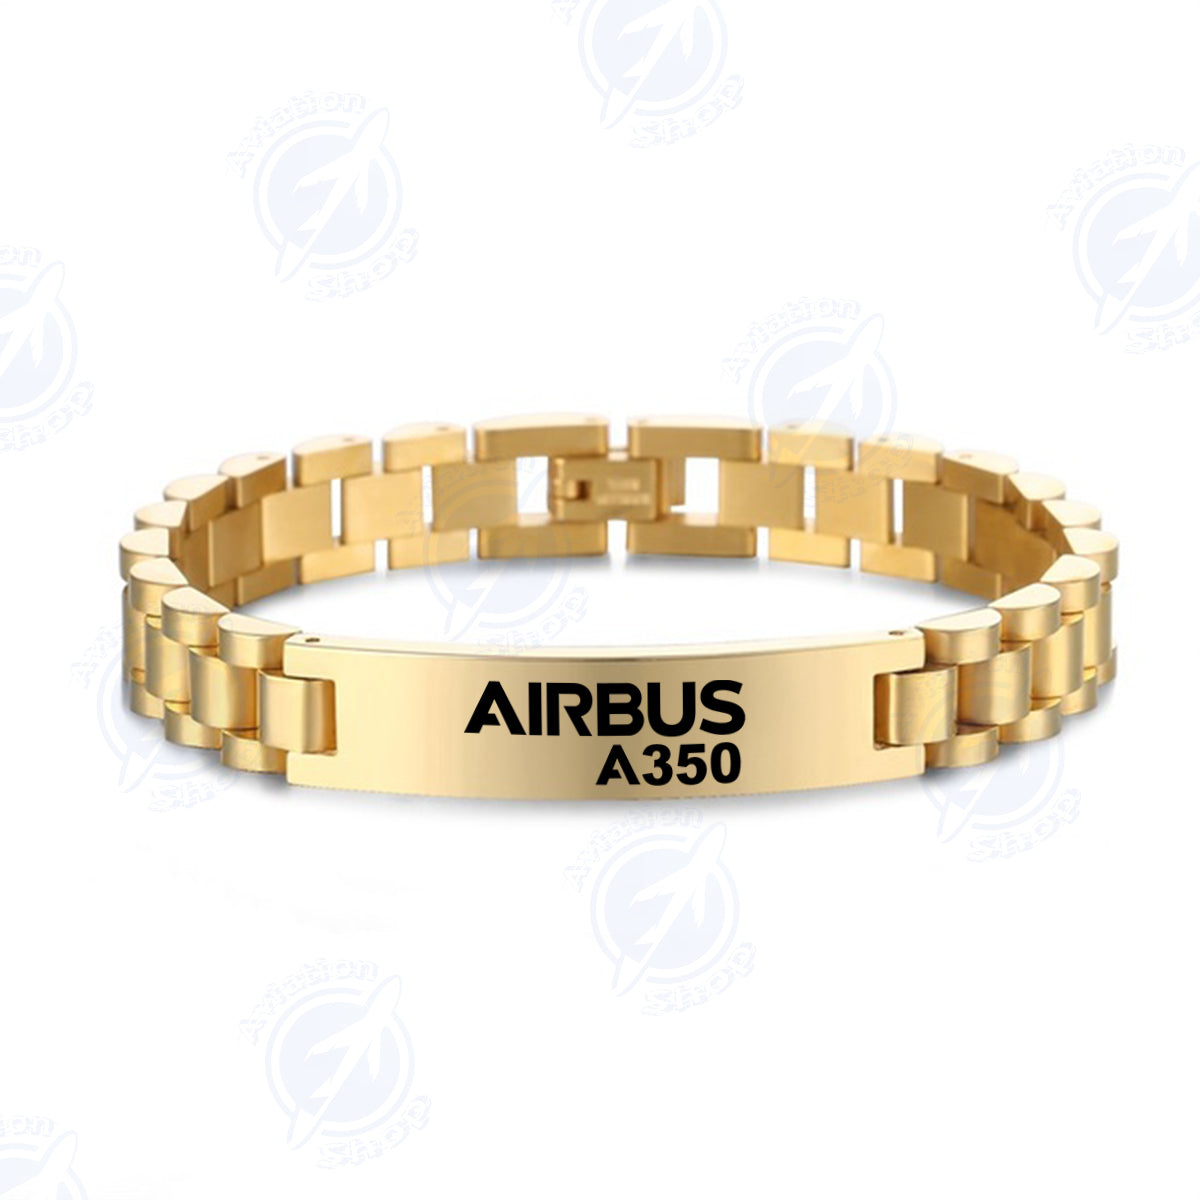 Airbus A350 & Text Designed Stainless Steel Chain Bracelets